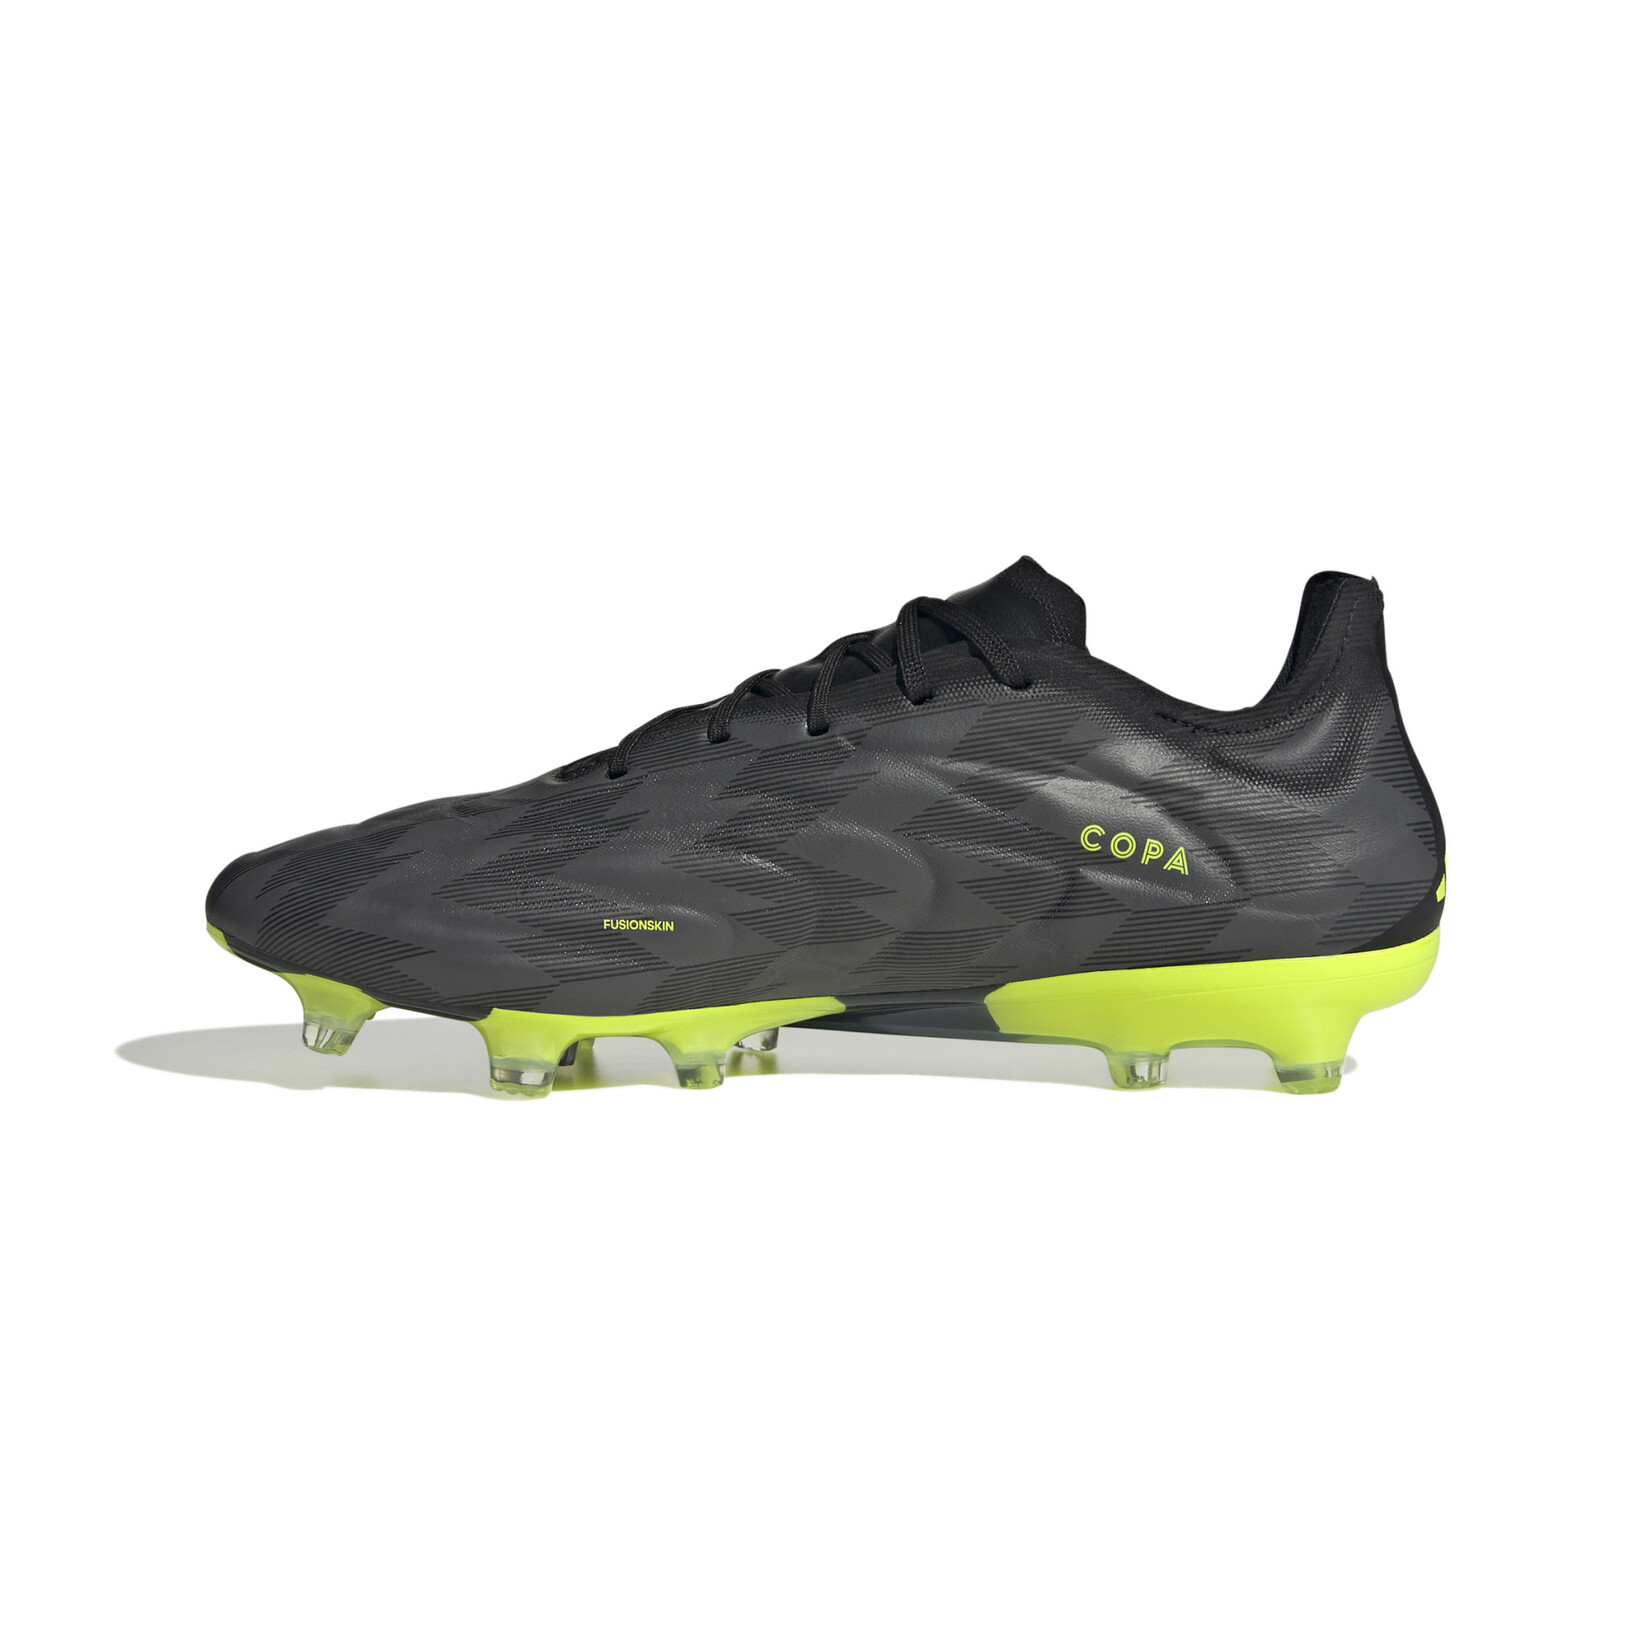 ADIDAS COPA PURE INJECTION.1 FG (BLACK/GRAY/LIME)